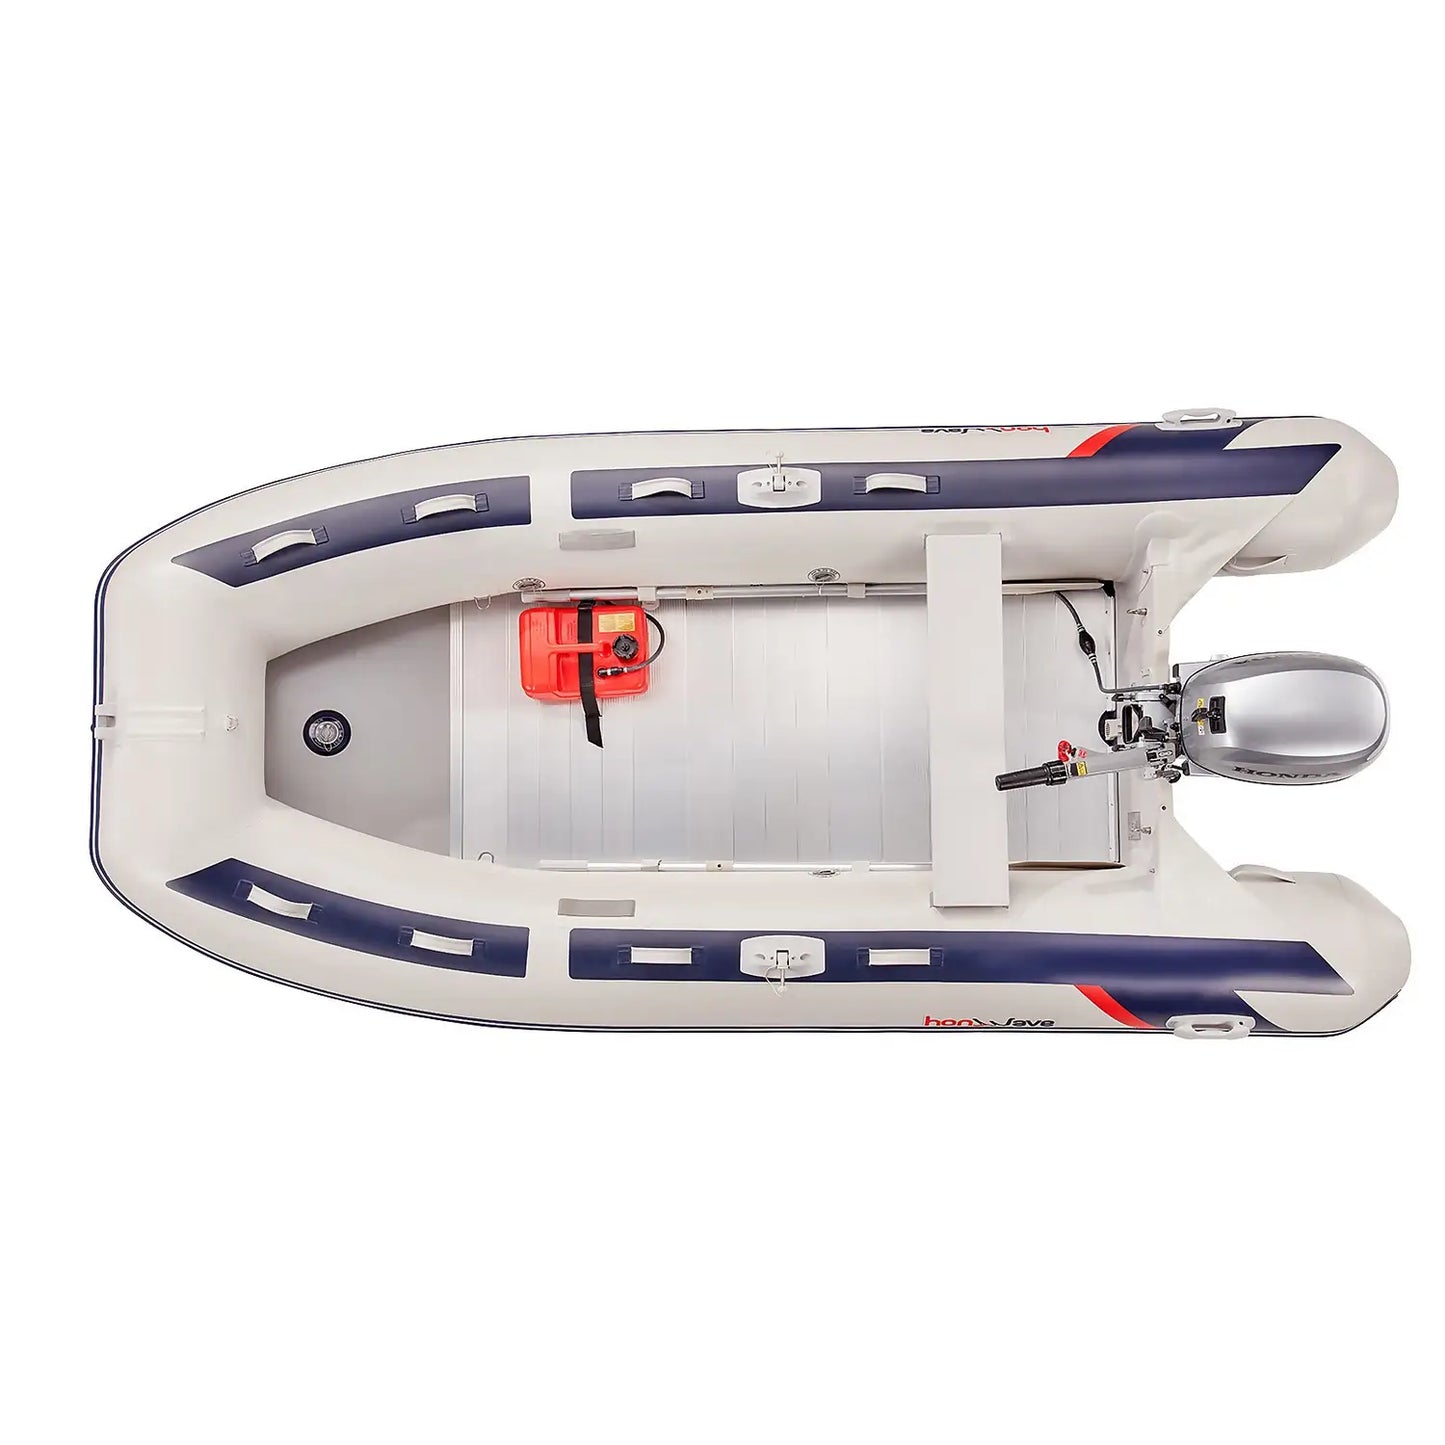 Honwave T30 3.0m Inflatable Dinghy Tender Boat with Aluminium Floor